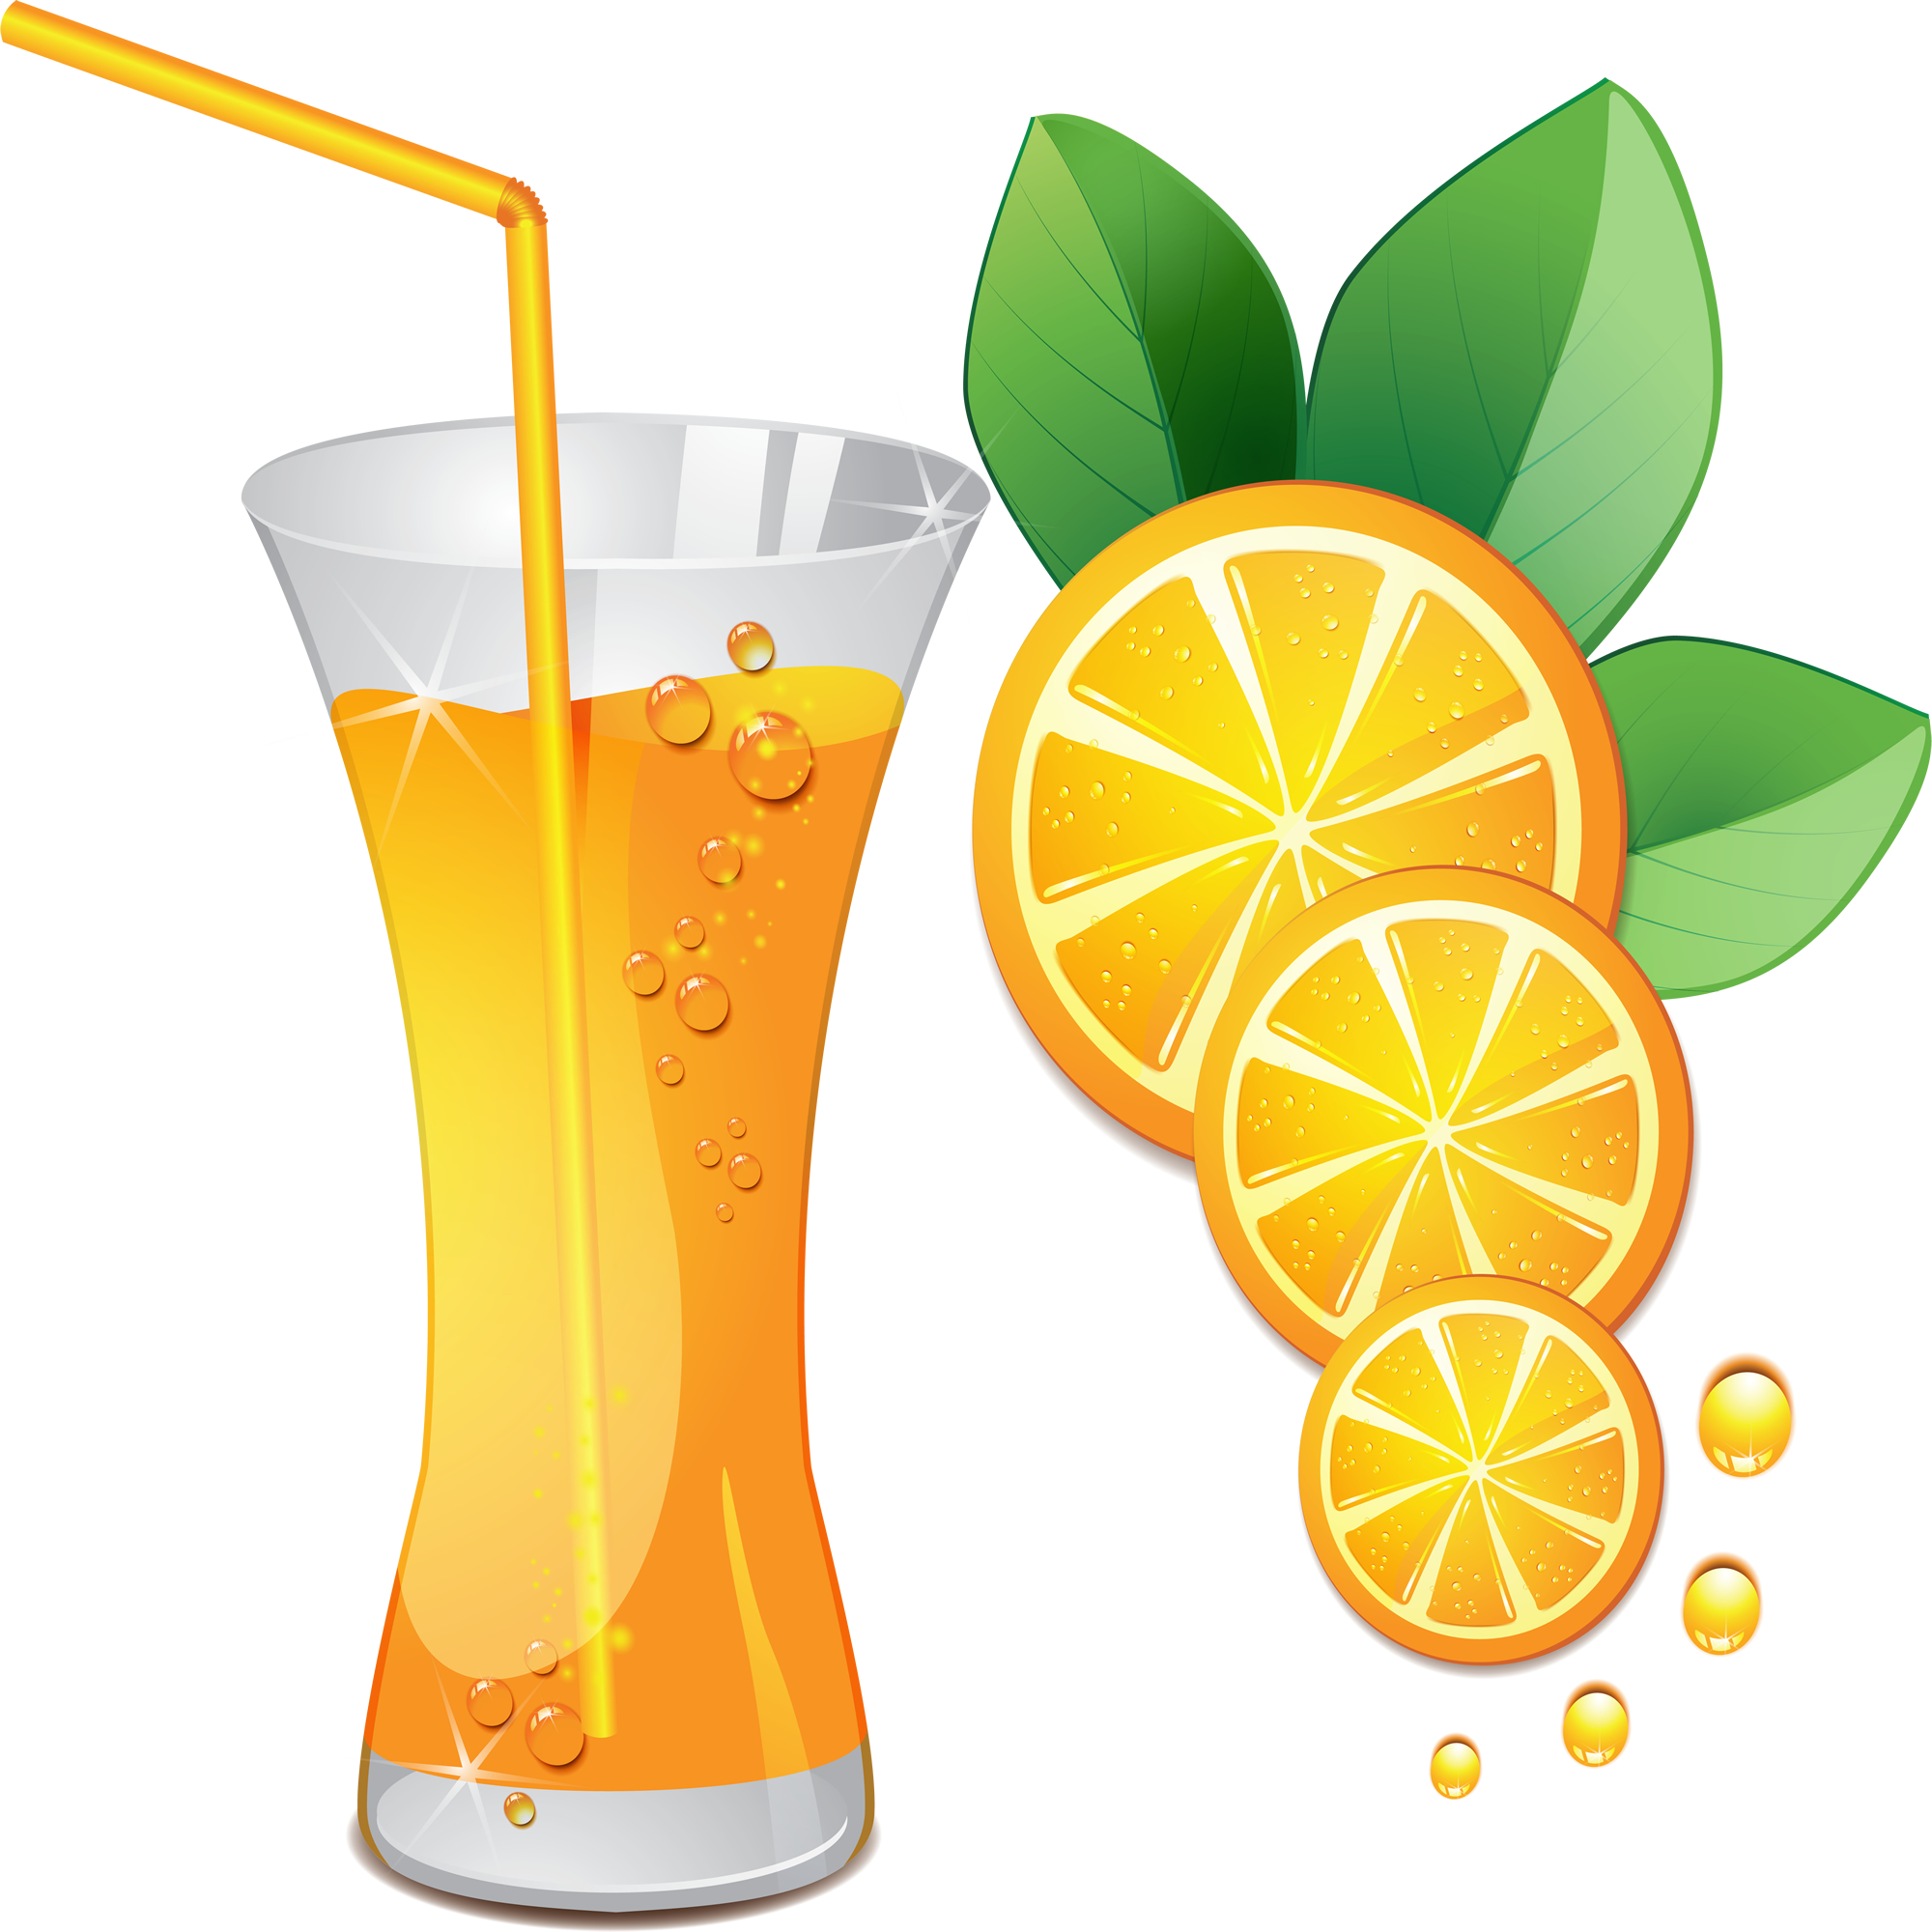 clipart of a juice - photo #29